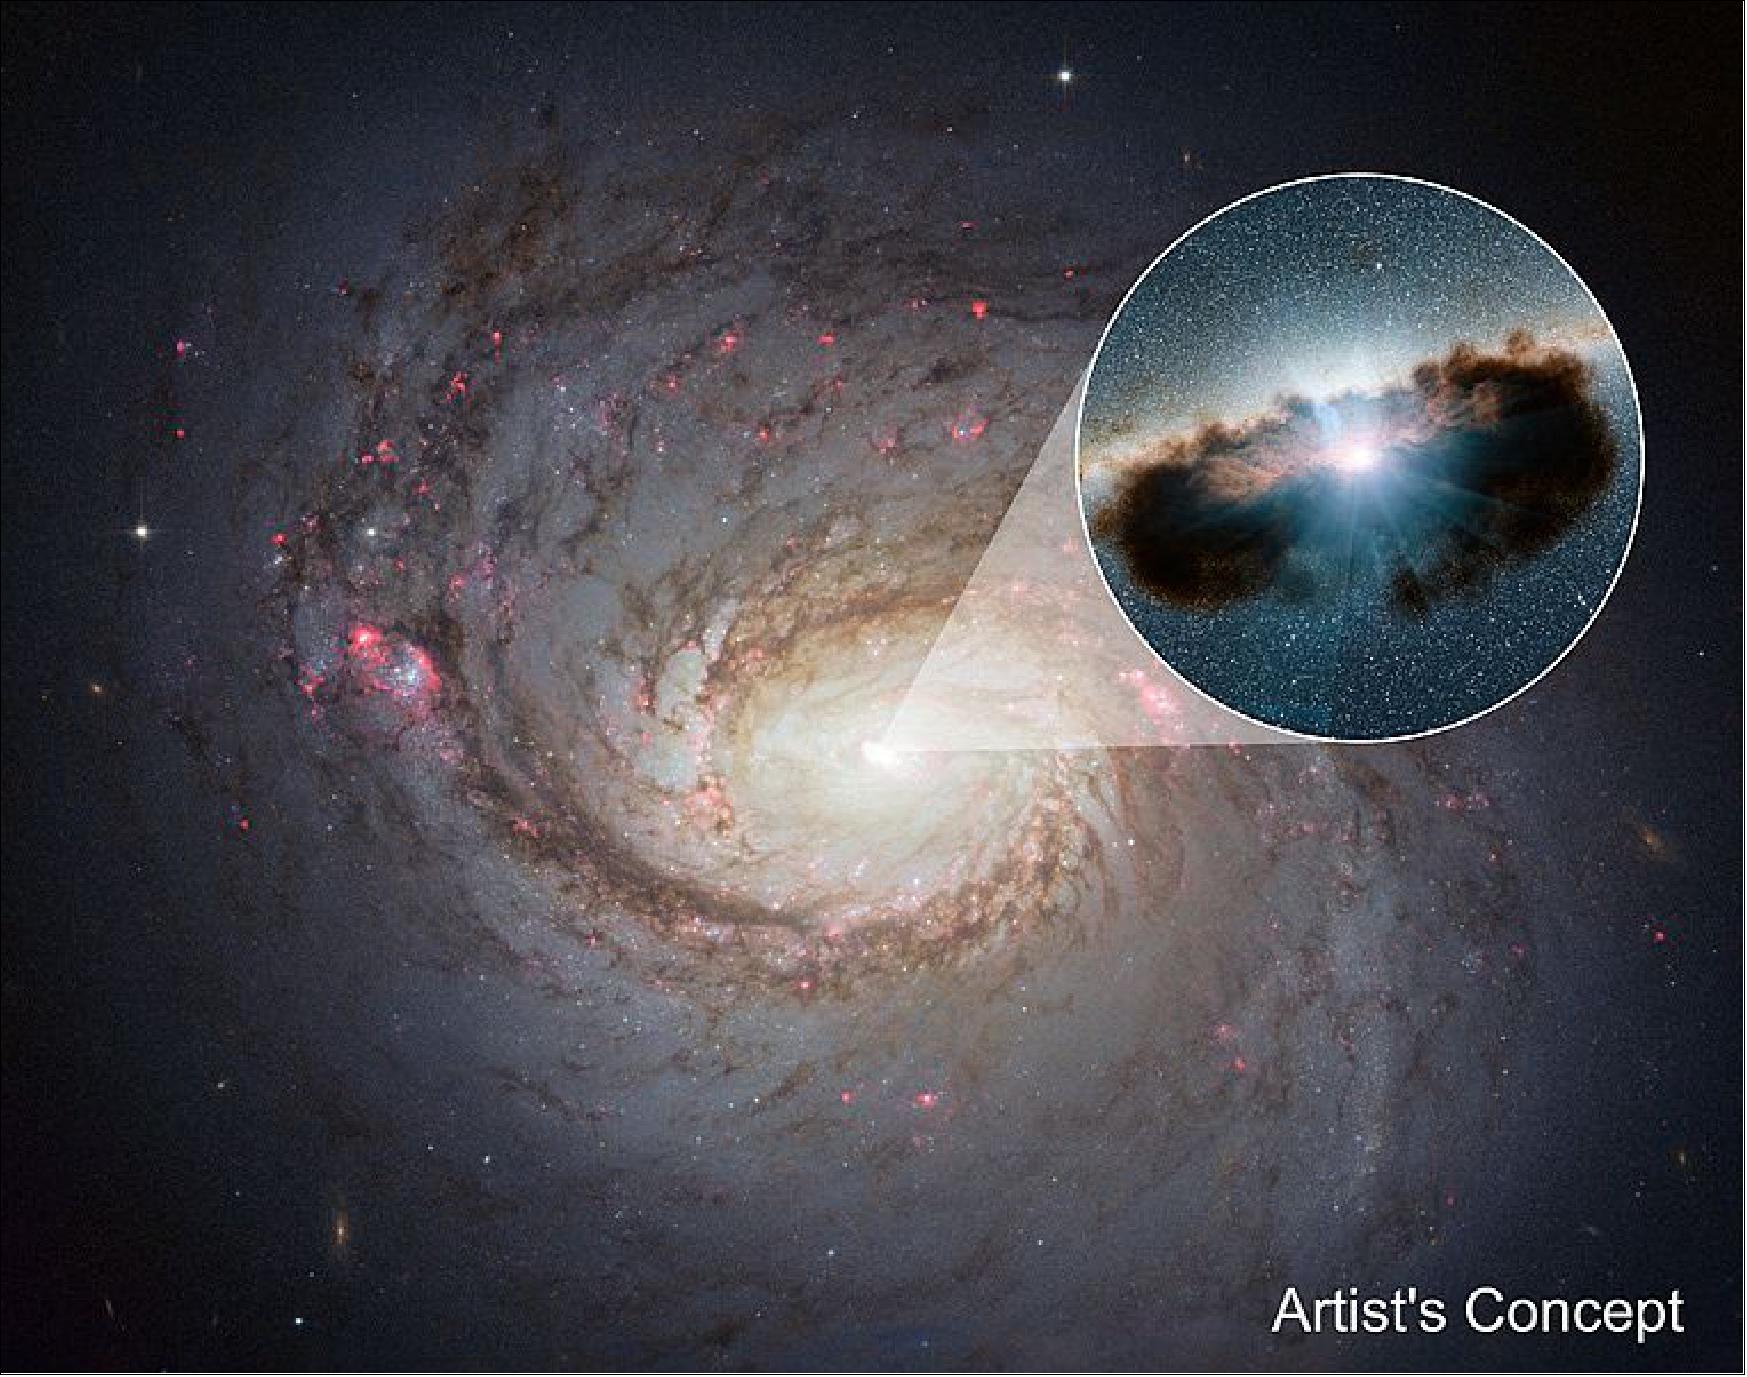 Figure 34: Galaxy NGC 1068 can be seen in close-up in this view from NASA's Hubble Space Telescope. NuSTAR's high-energy X-rays eyes were able to obtain the best view yet into the hidden lair of the galaxy's central, supermassive black hole (image credit: NASA/JPL, CalTech)